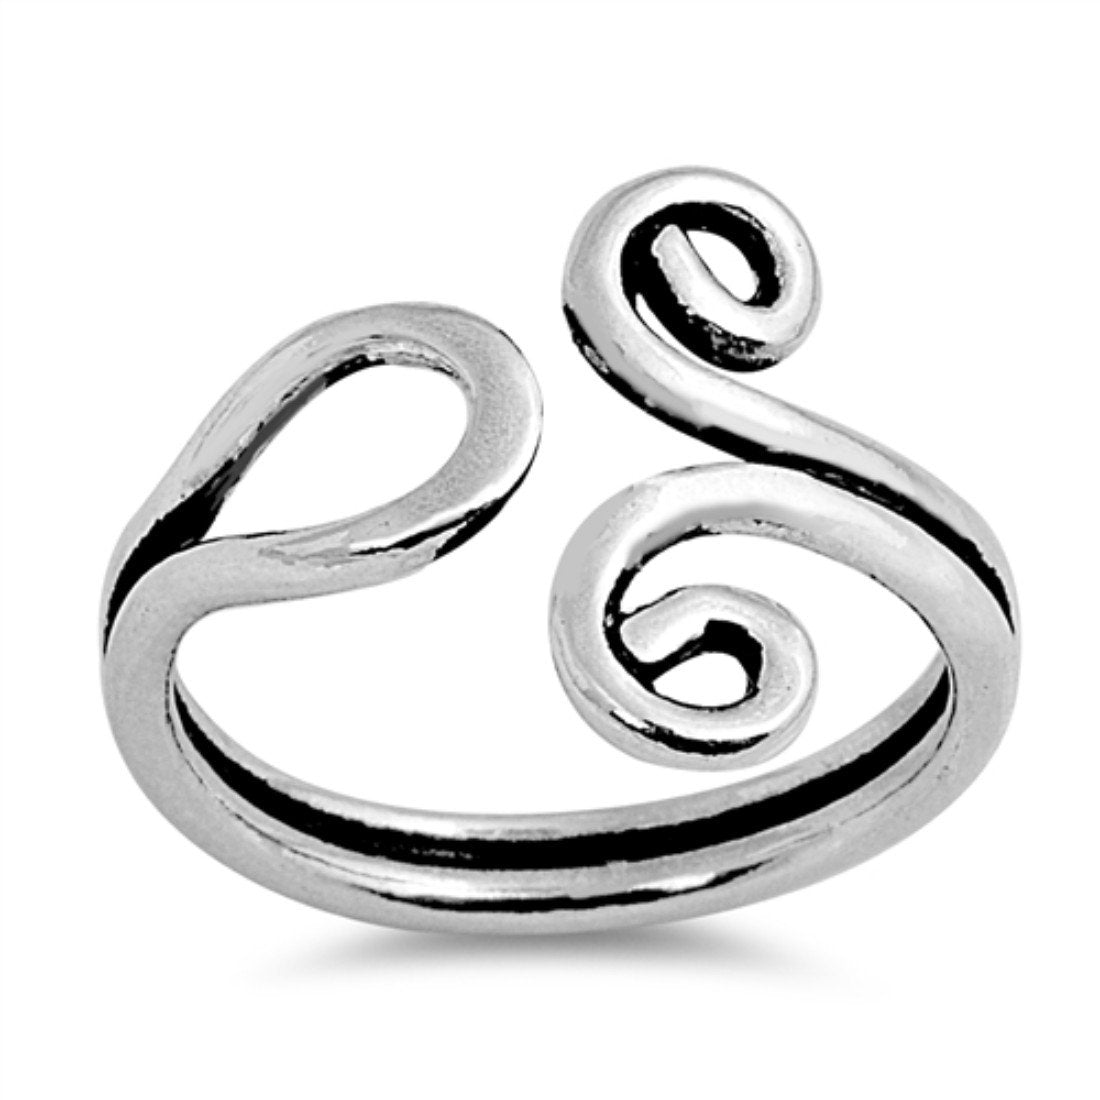 Silver Toe Ring Adjustable Band 925 Sterling Silver (12mm)